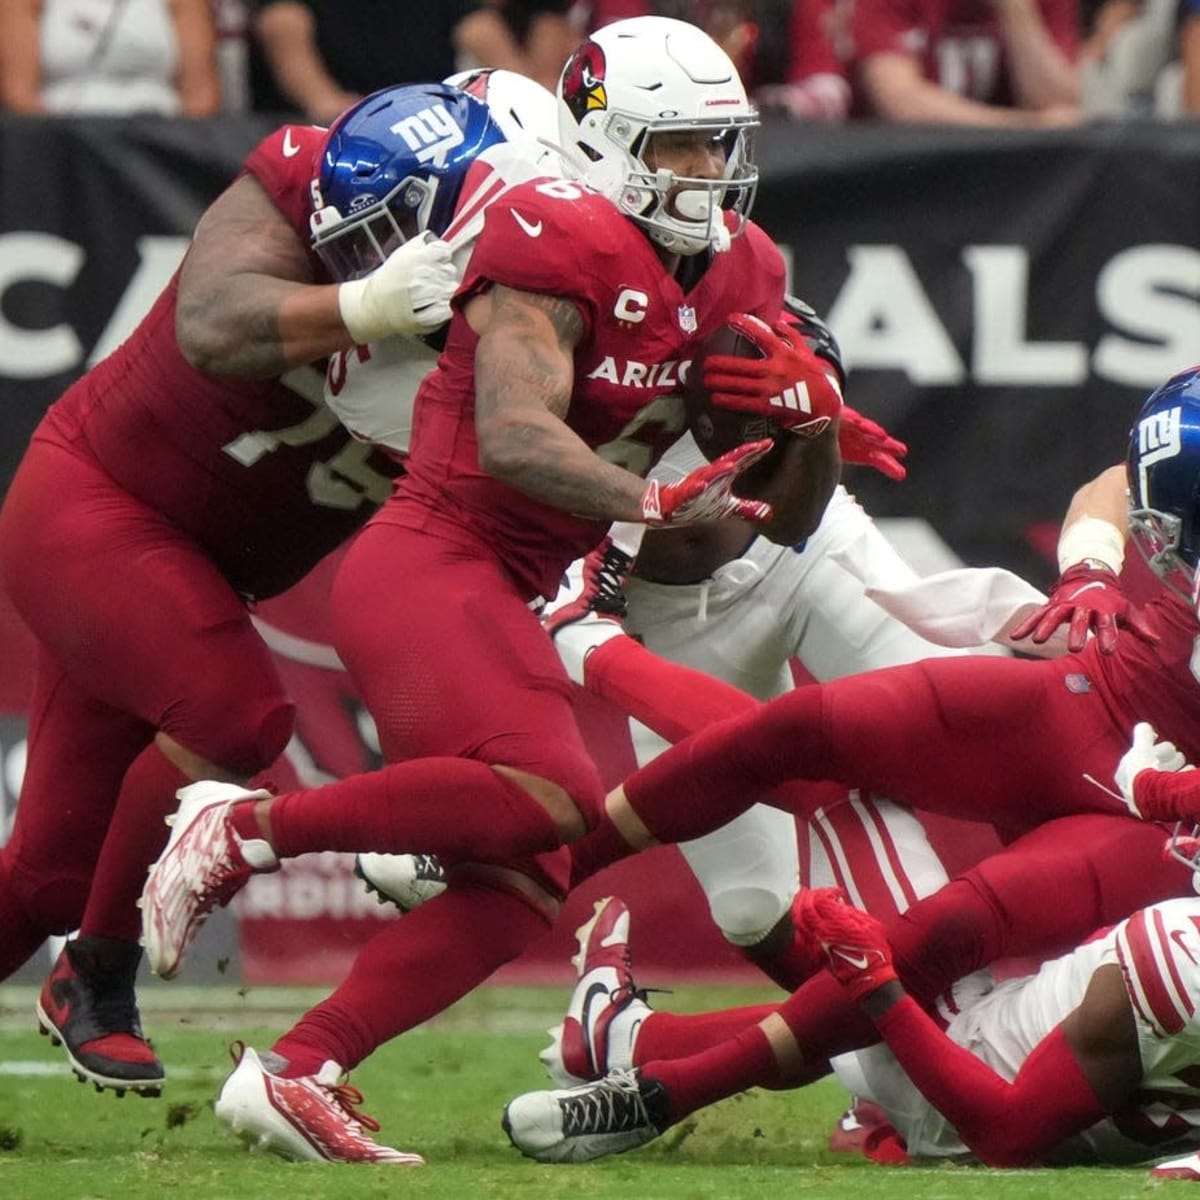 Cowboys vs. Cardinals: How to Watch the Week 3 NFL Game Online